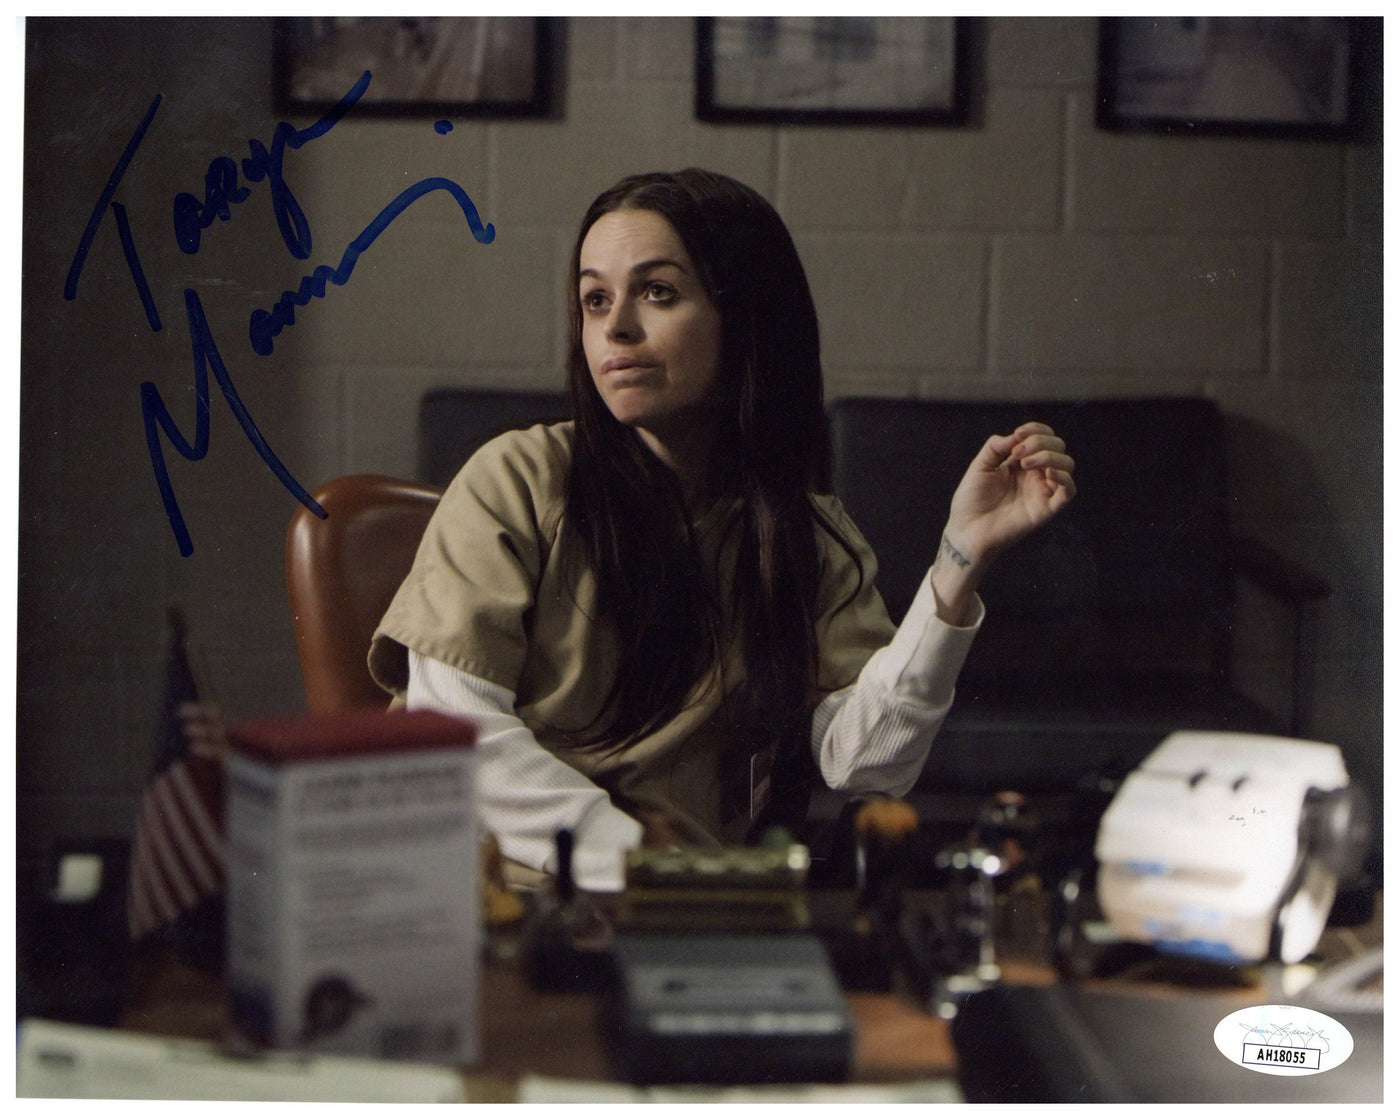 Taryn Manning Signed 8x10 Photo Orange is the New Black Autographed JSA